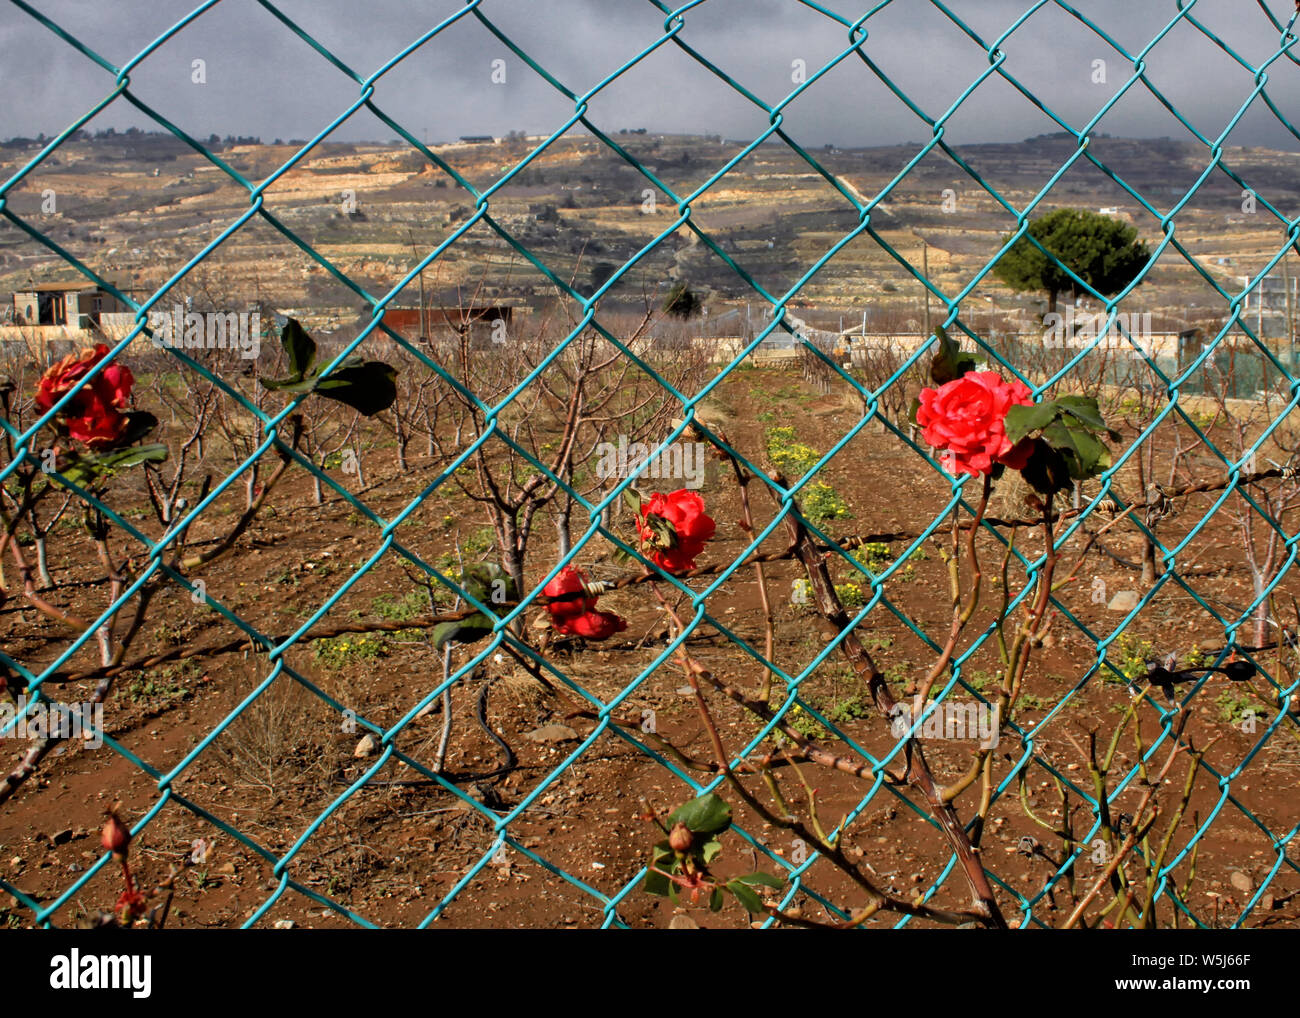 Roses on a blue fence guard over a winter field of crops in the Druze village Mas'ade in the Golan Heights of Israel. Stock Photo